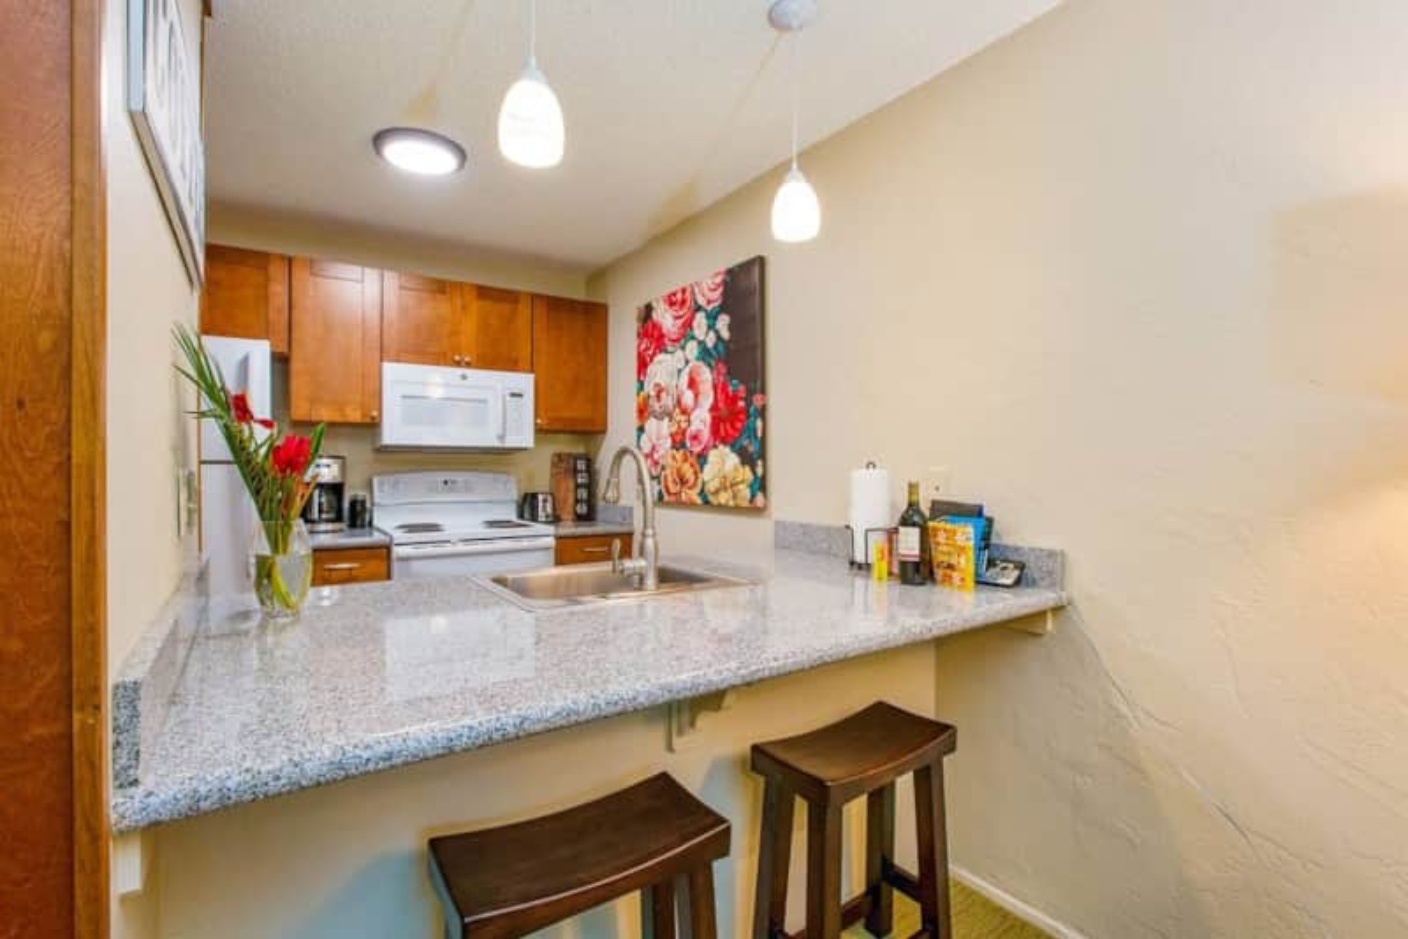 Kapaa Vacation Rentals, Kahaki Hale - Kitchen area is open to the living area and has ample counter space for creating delicious meals